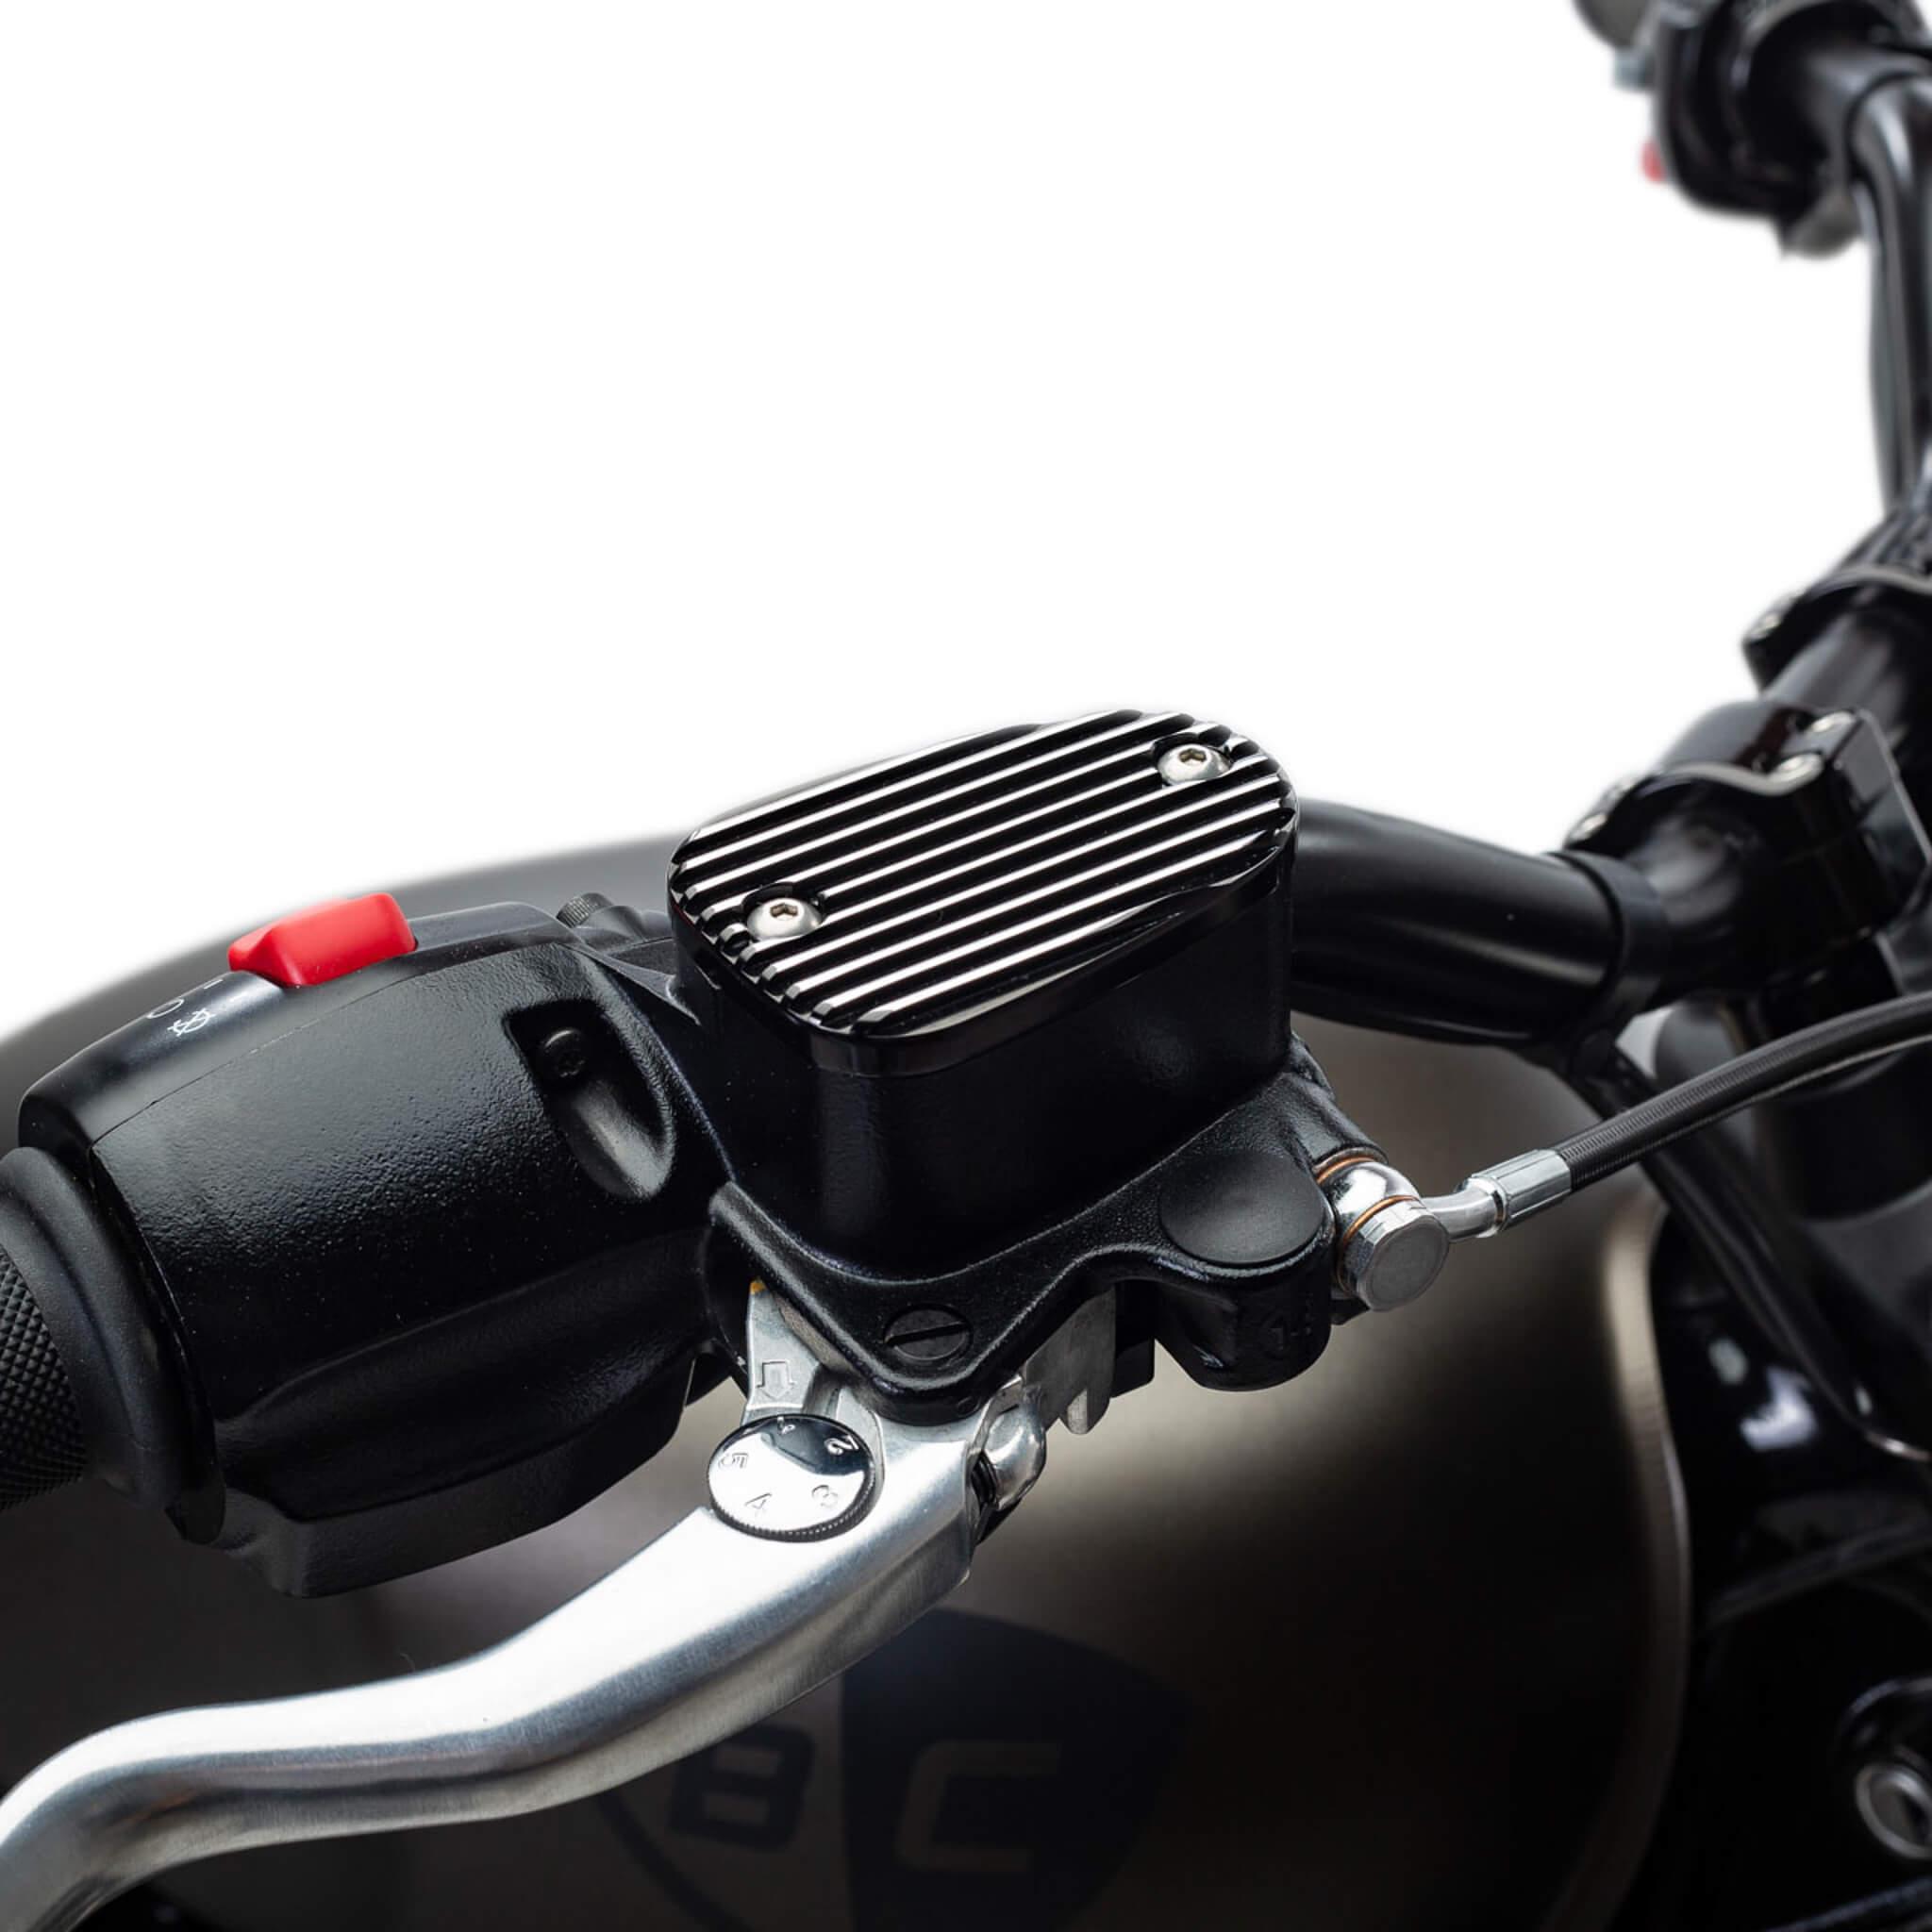 Best Finned Master Cylinder Cover for Triumph Motorcycles - British Customs